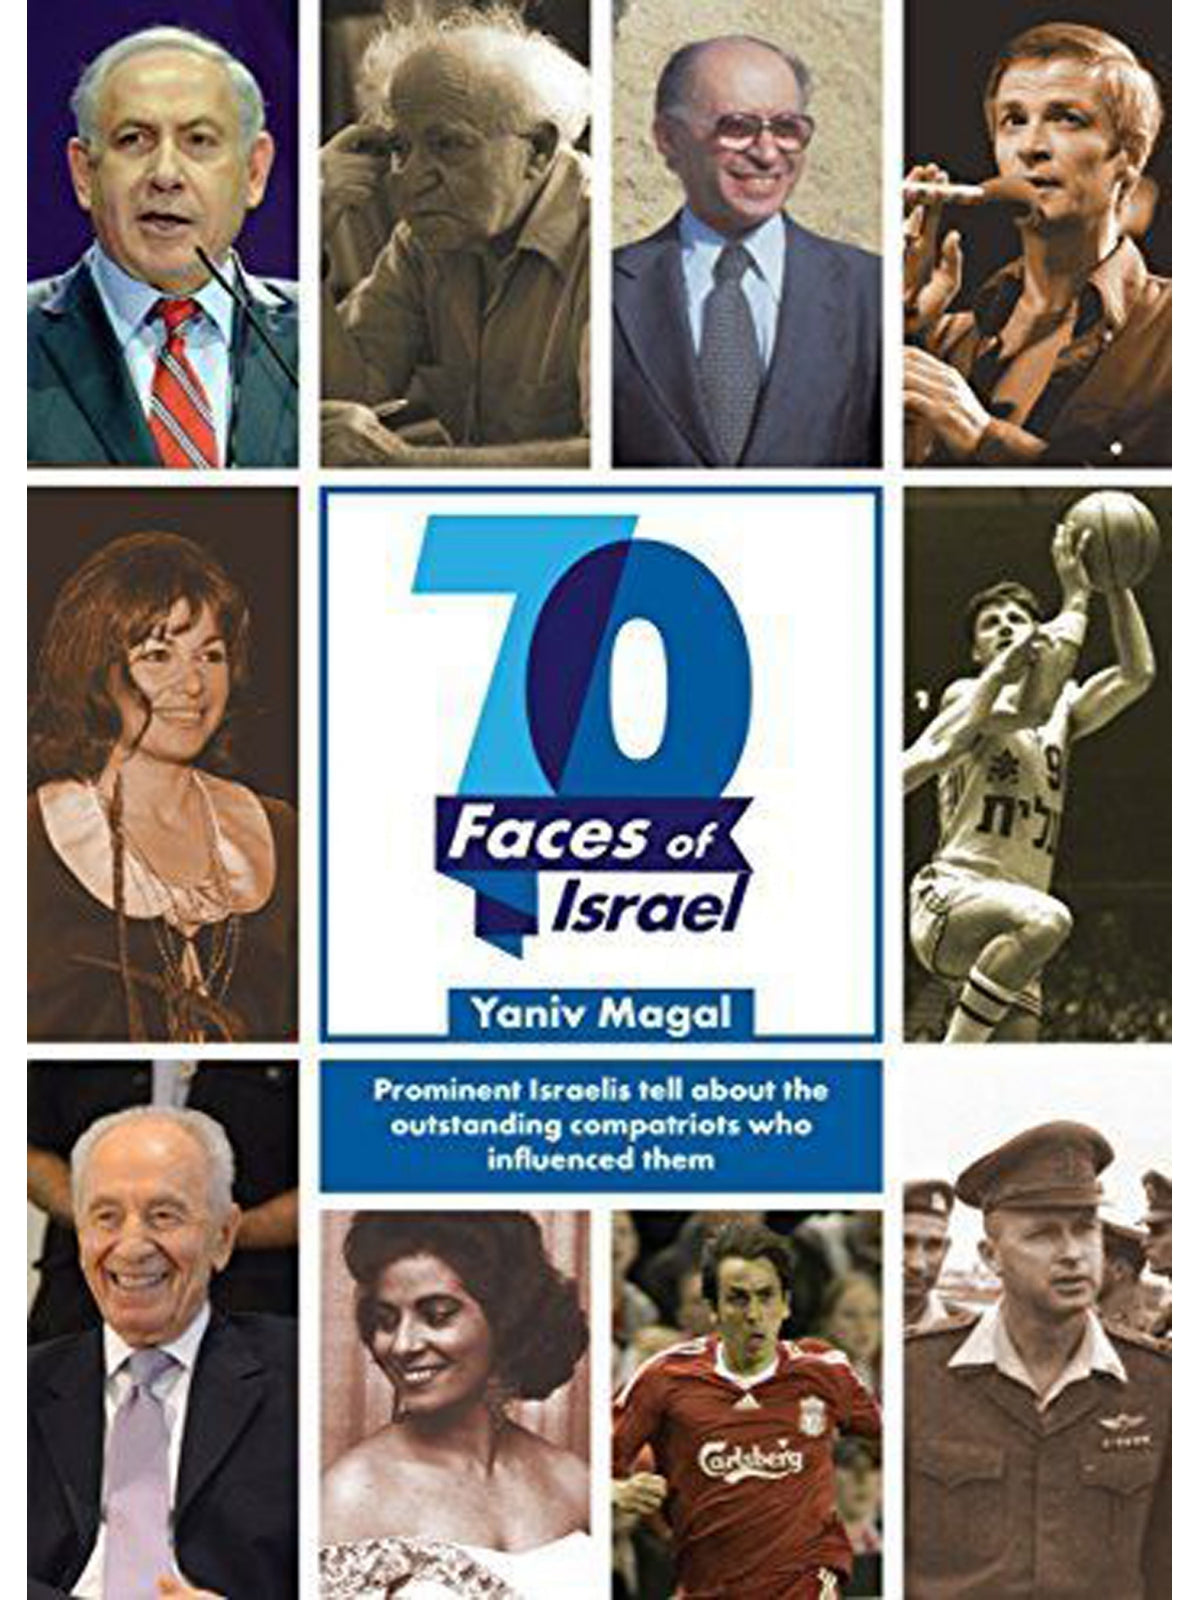 70 FACES OF ISRAEL